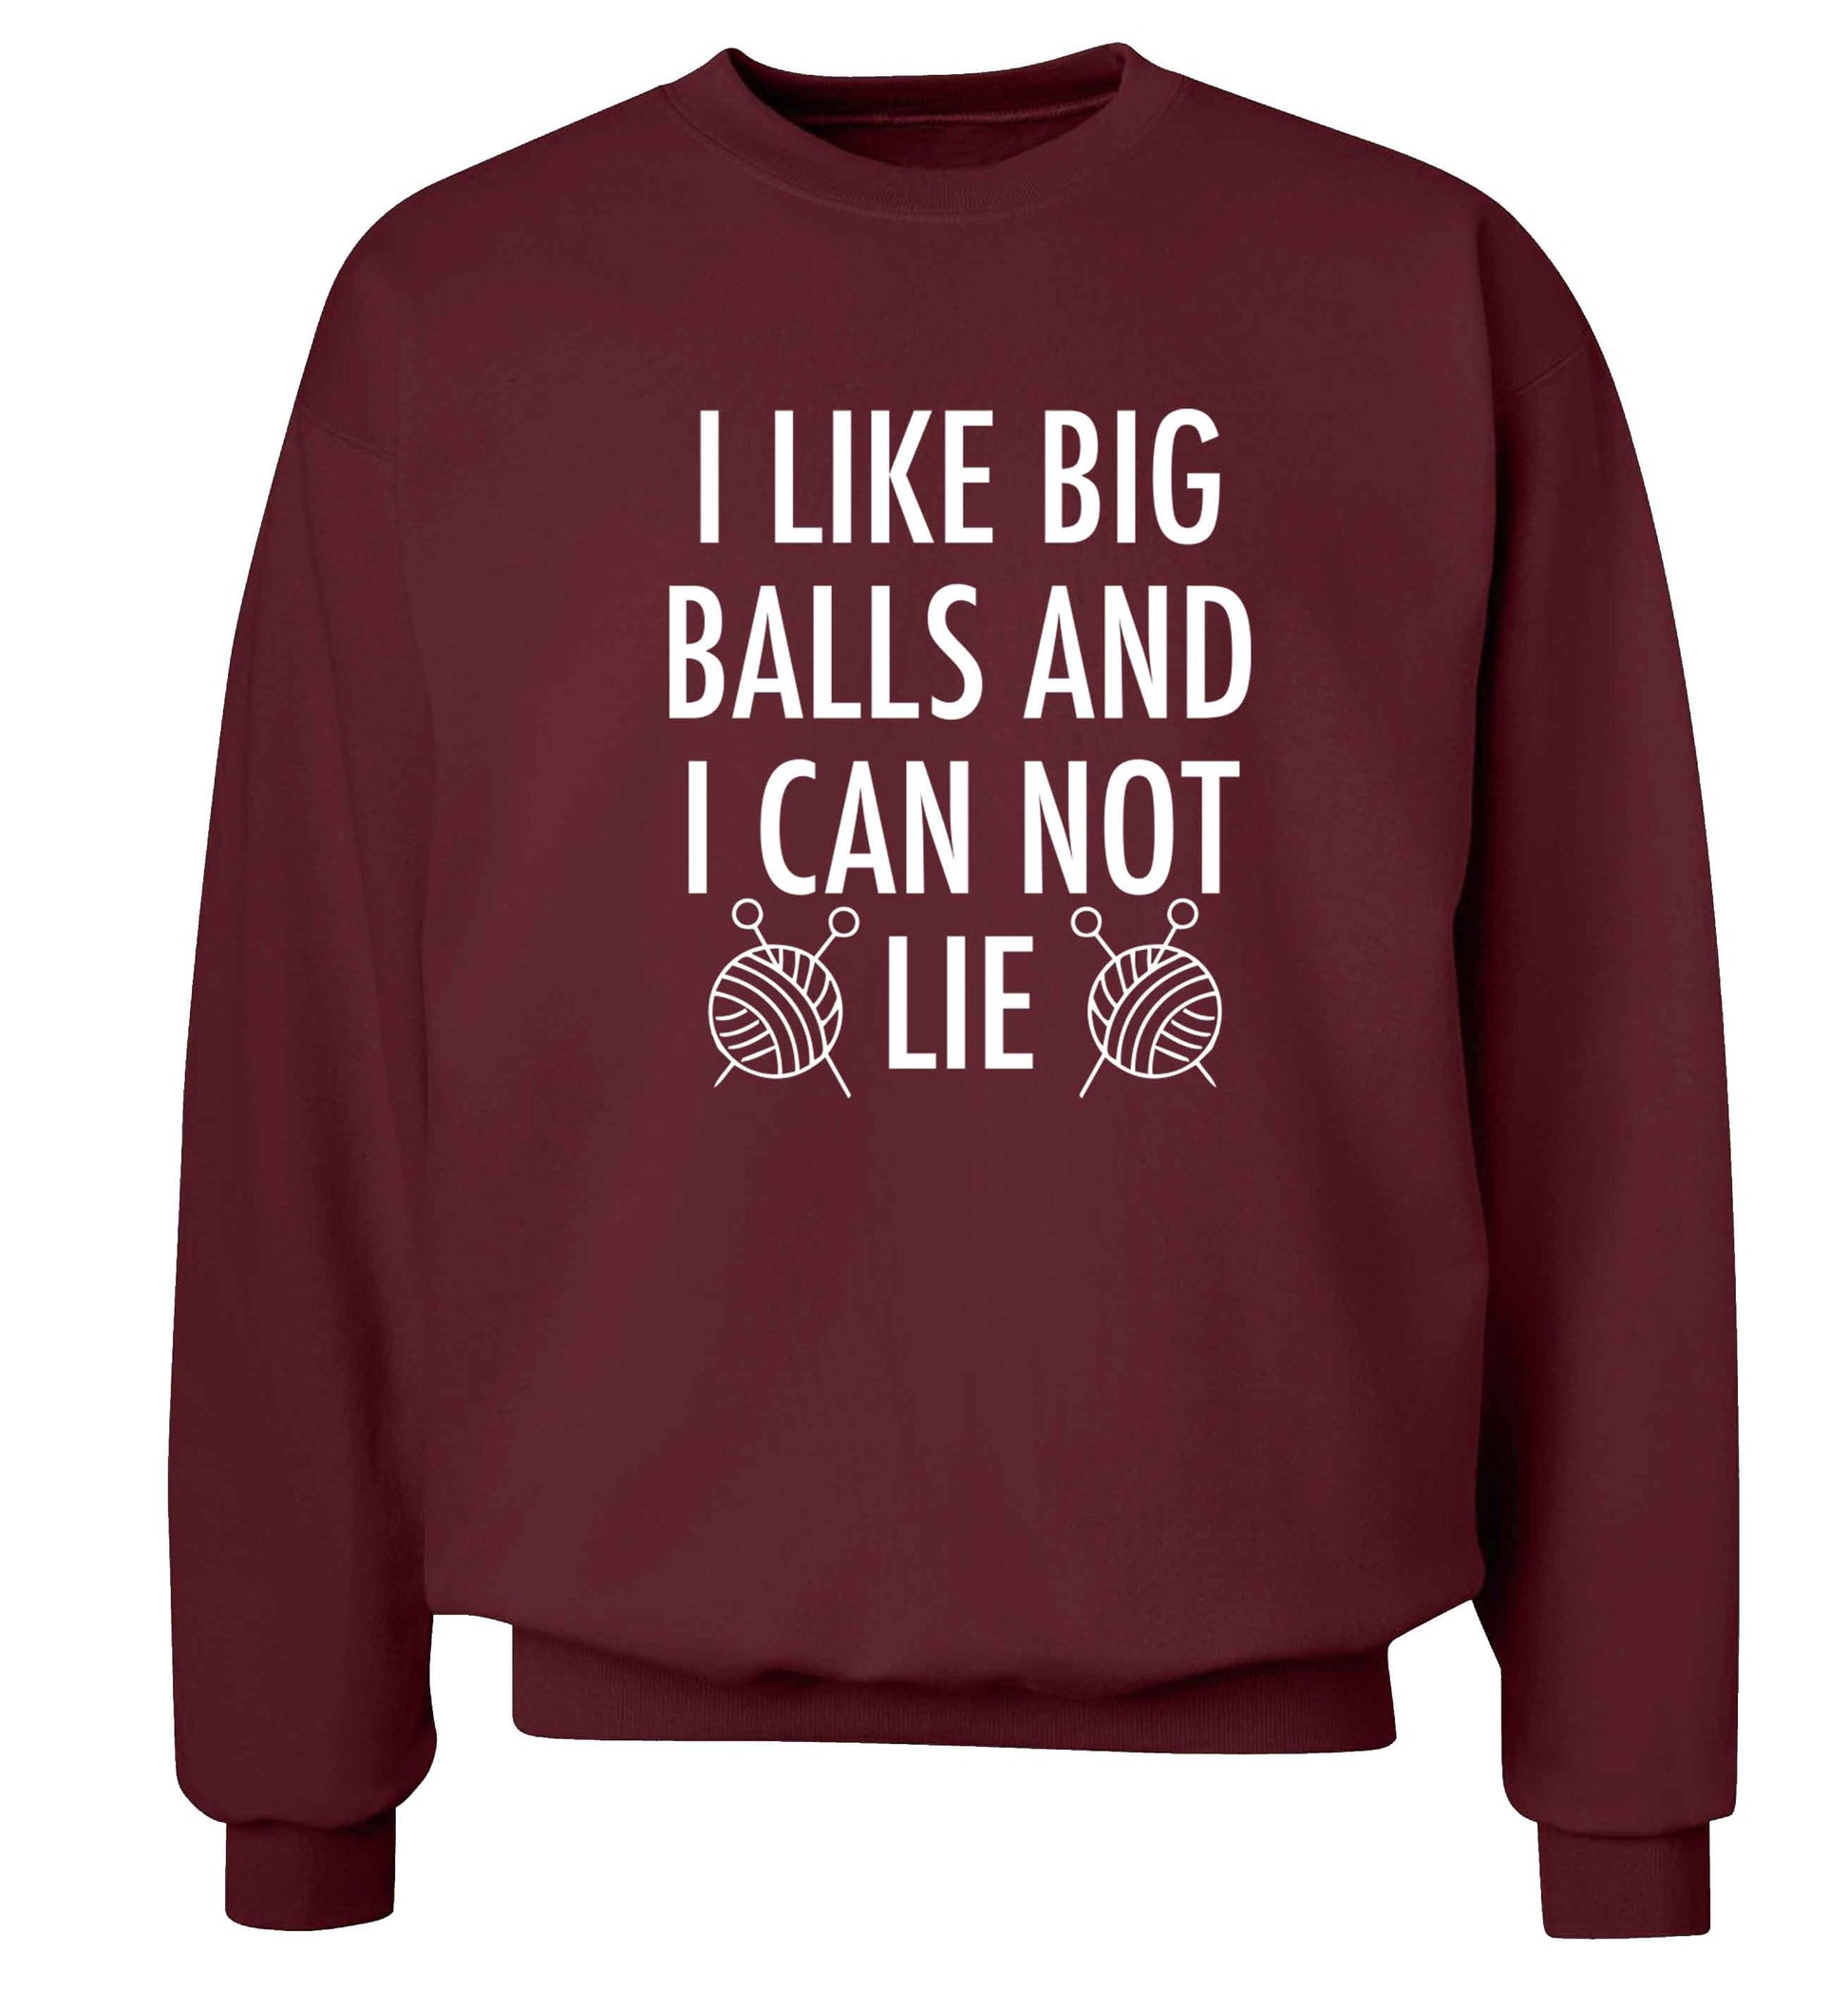 I like big balls and I can not lie Adult's unisex maroon Sweater 2XL